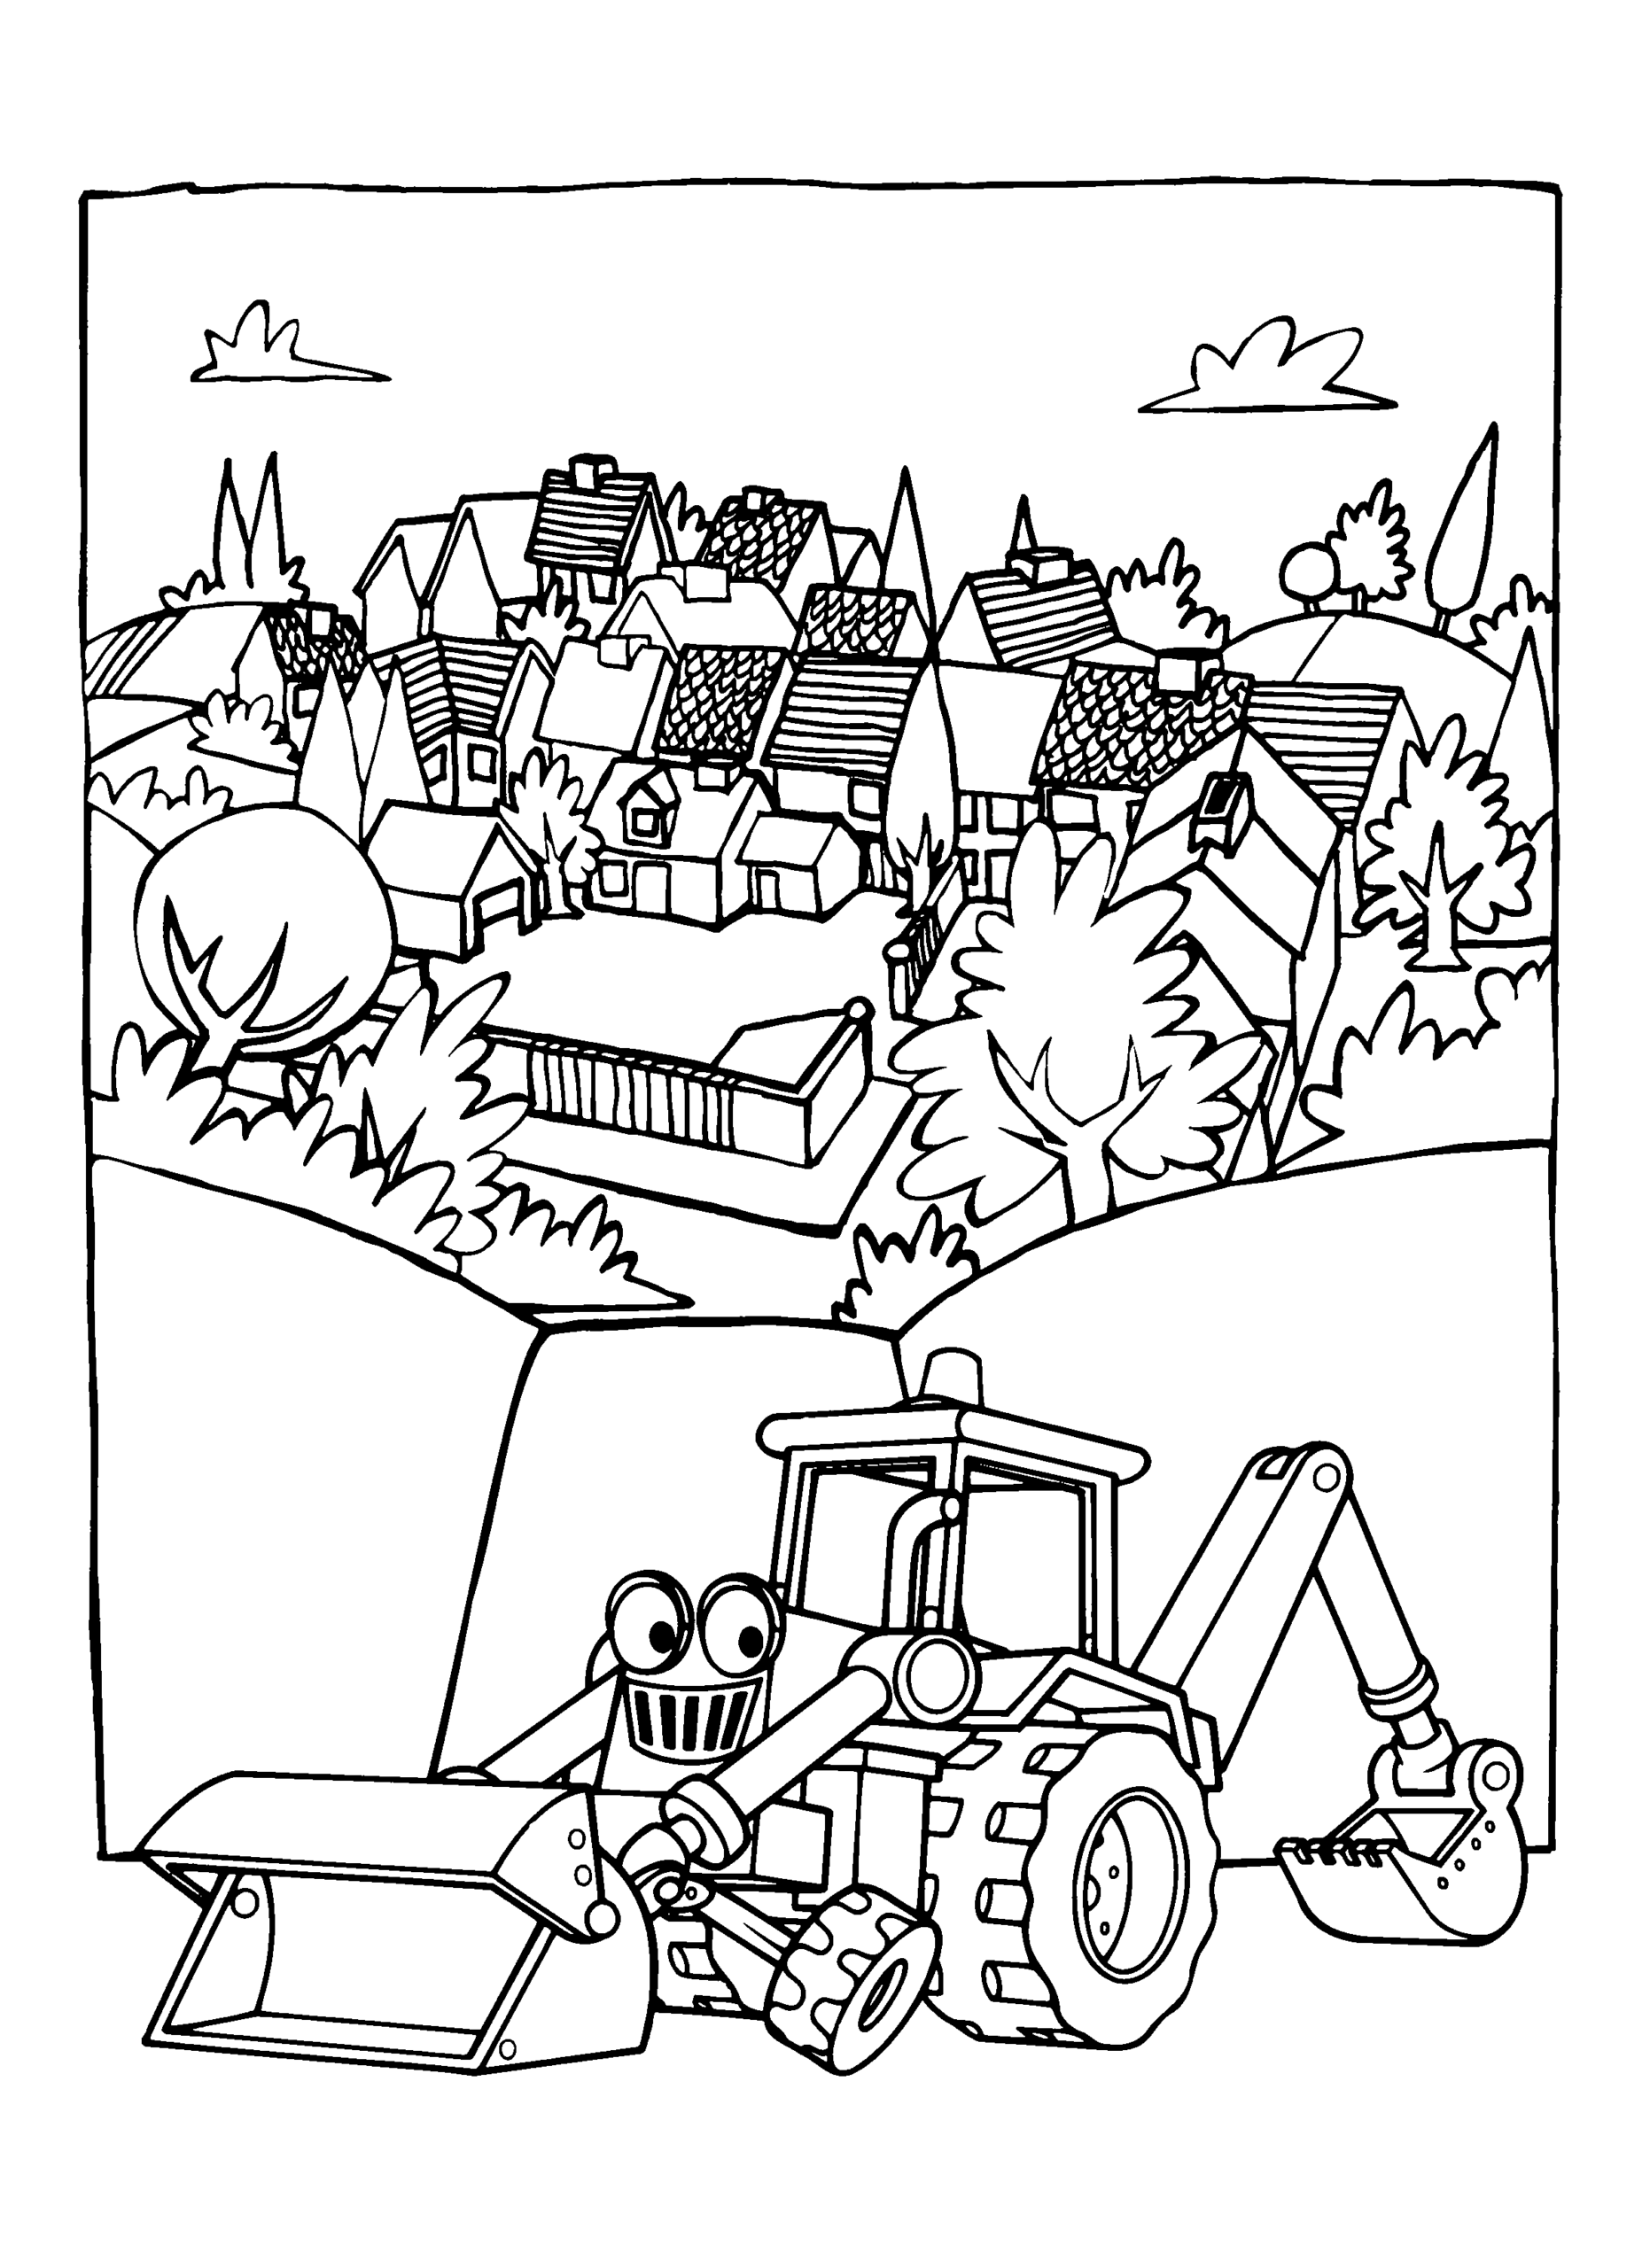 Bob the Builder Coloring Pages TV Film bob the builder 69 Printable 2020 01090 Coloring4free